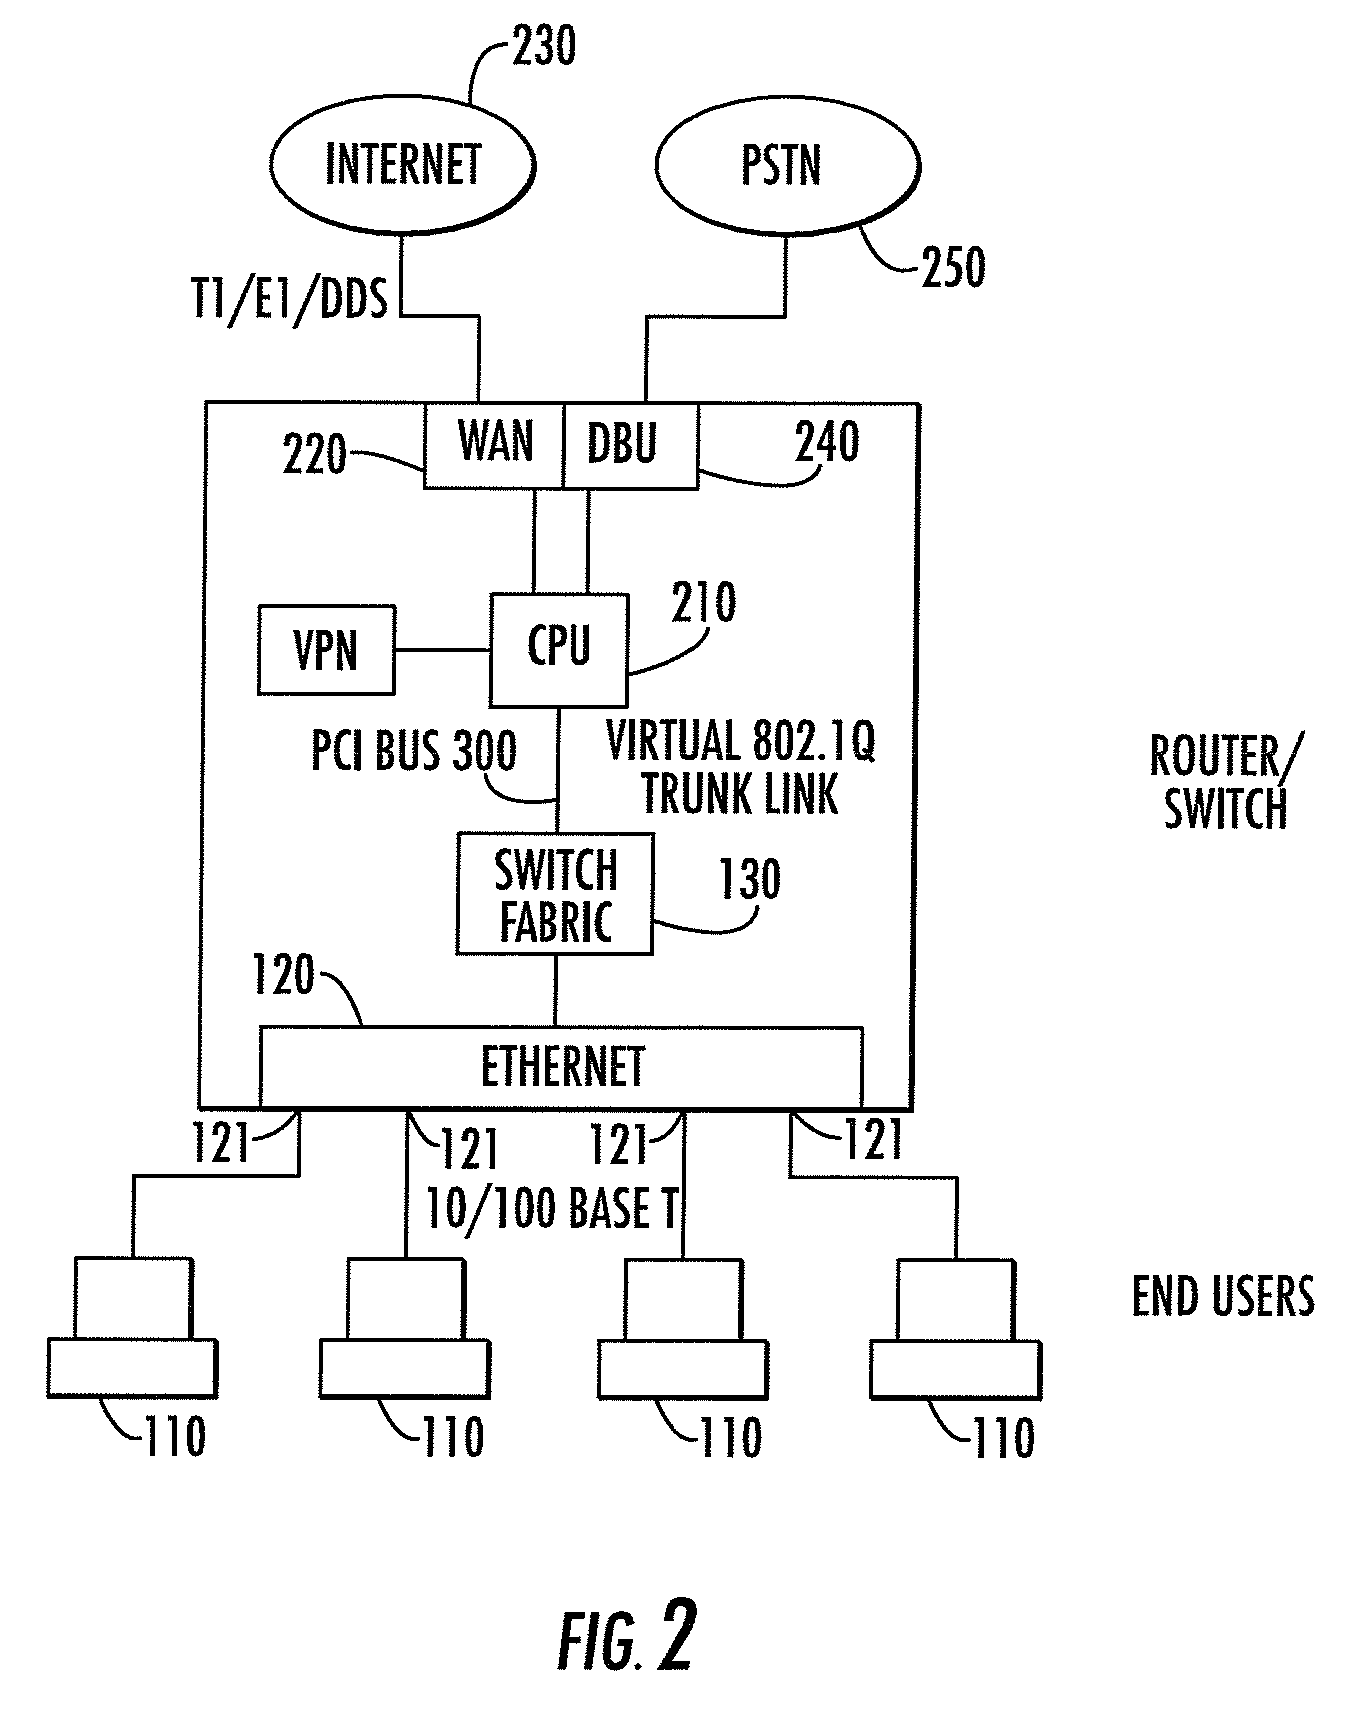 Integrated router switch-based port-mirroring mechanism for monitoring LAN-to-WAN and WAN-to-LAN traffic